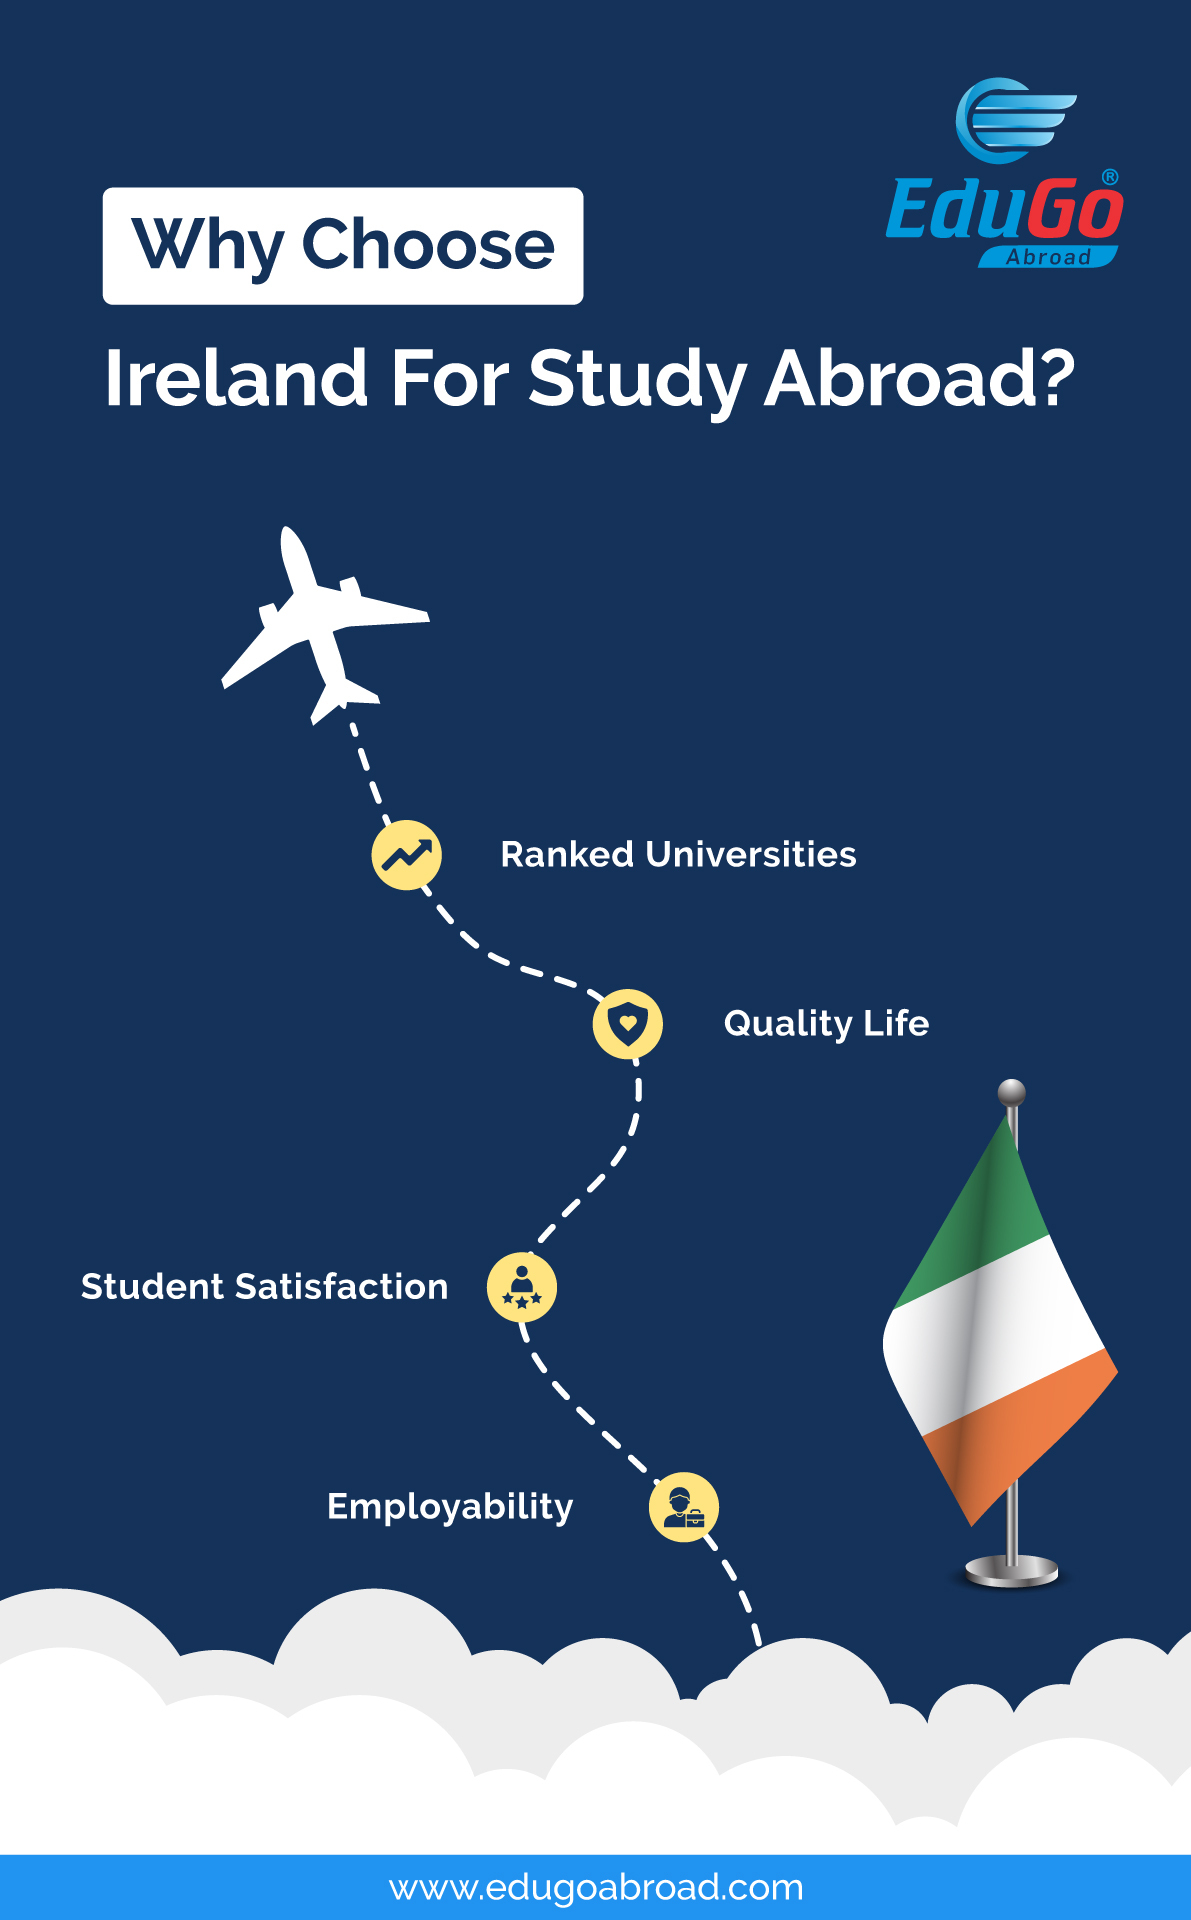 Why choose Ireland for Study Abroad